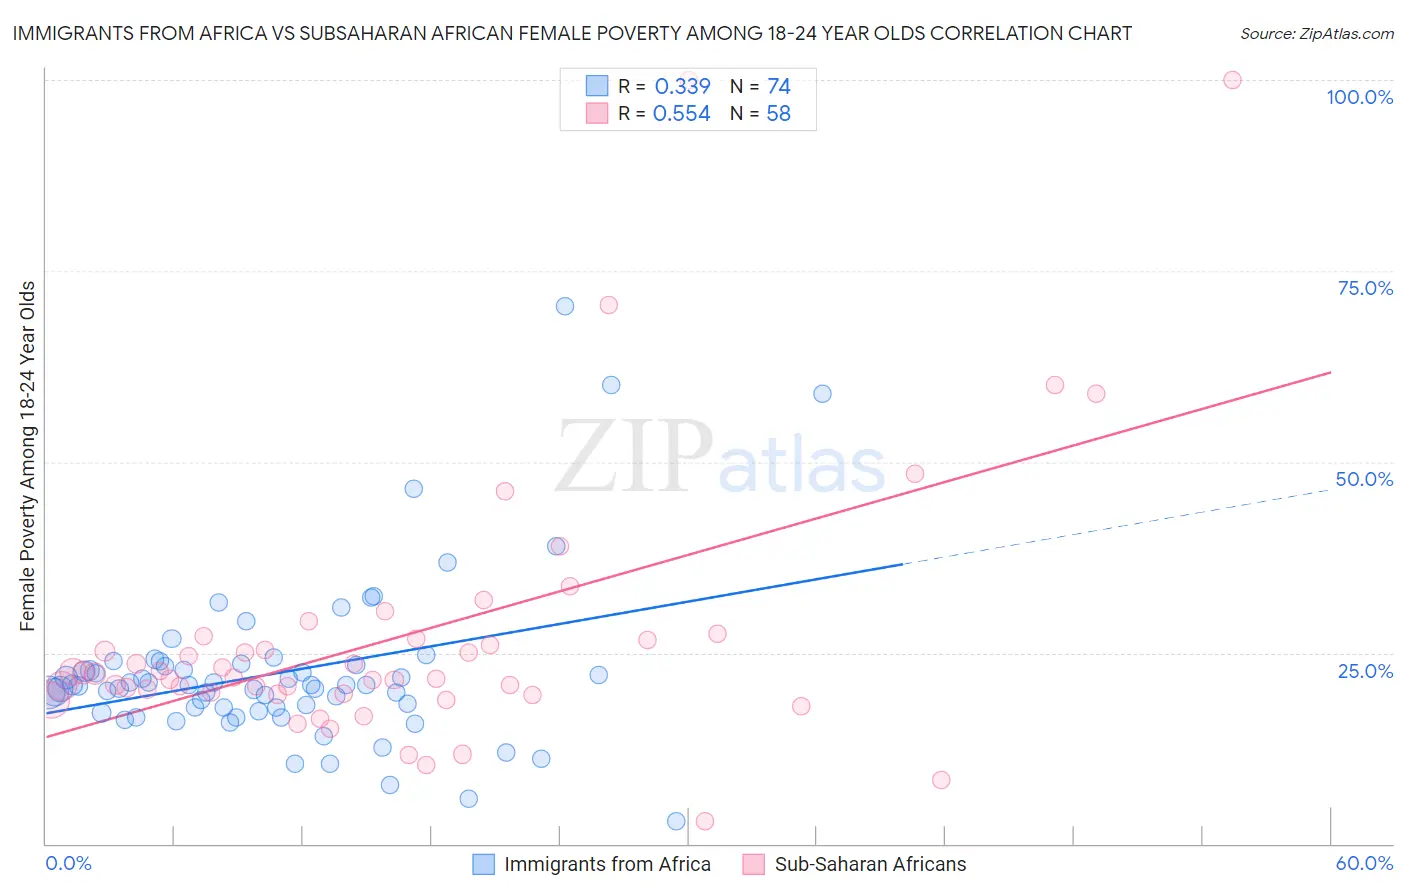 Immigrants from Africa vs Subsaharan African Female Poverty Among 18-24 Year Olds